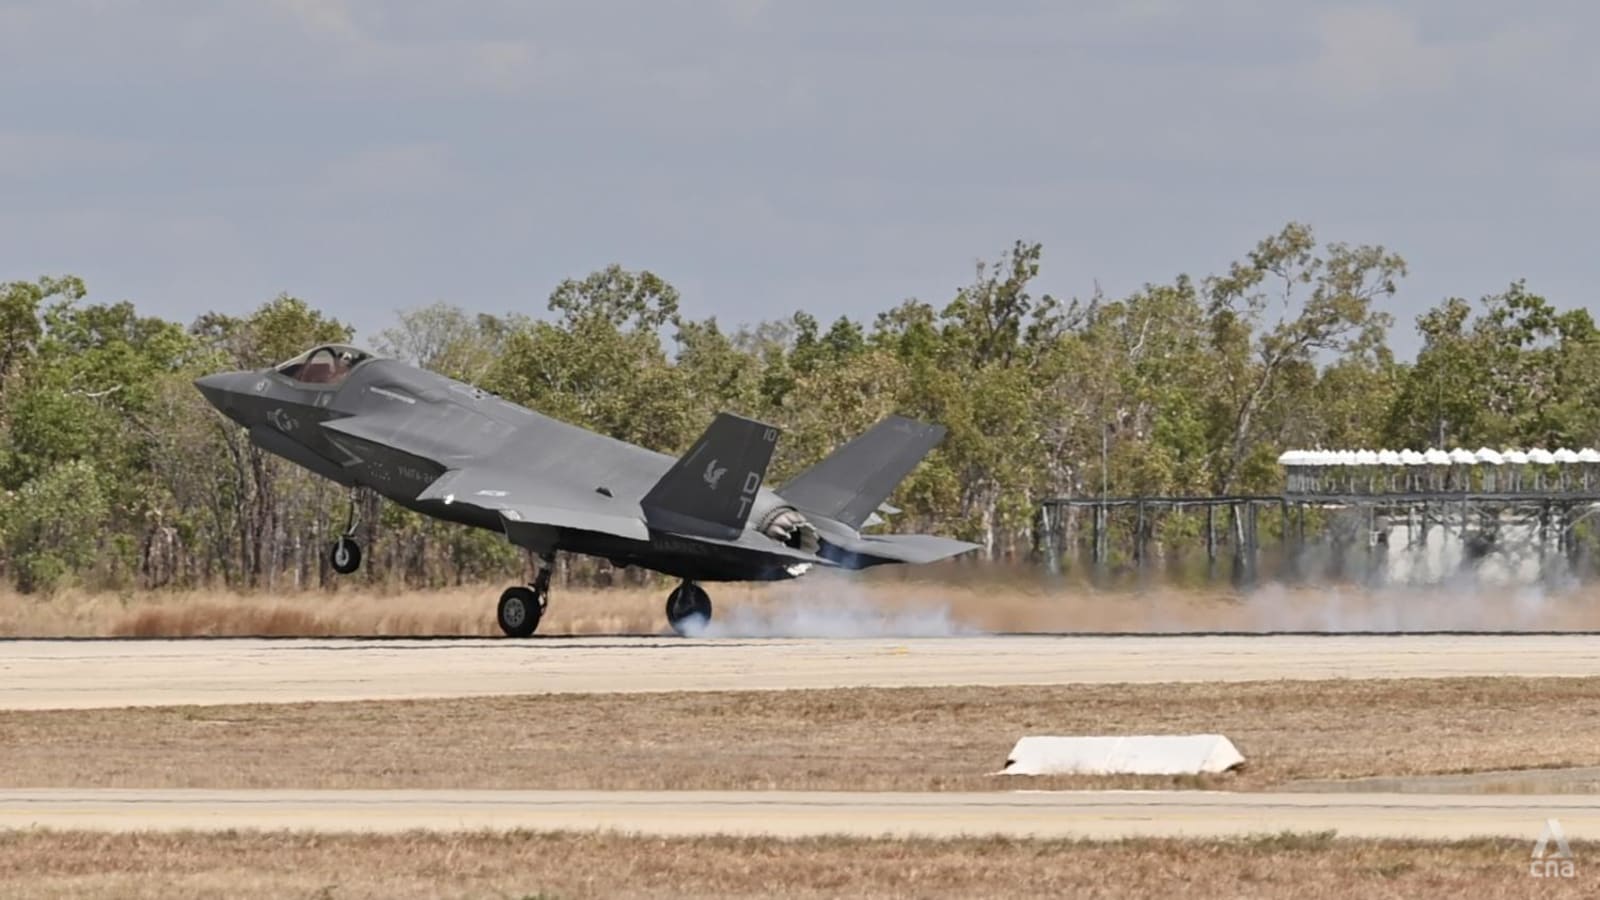 ‘Rigorous evaluation’ on F-35 continues as Singapore’s defence needs evolve: RSAF